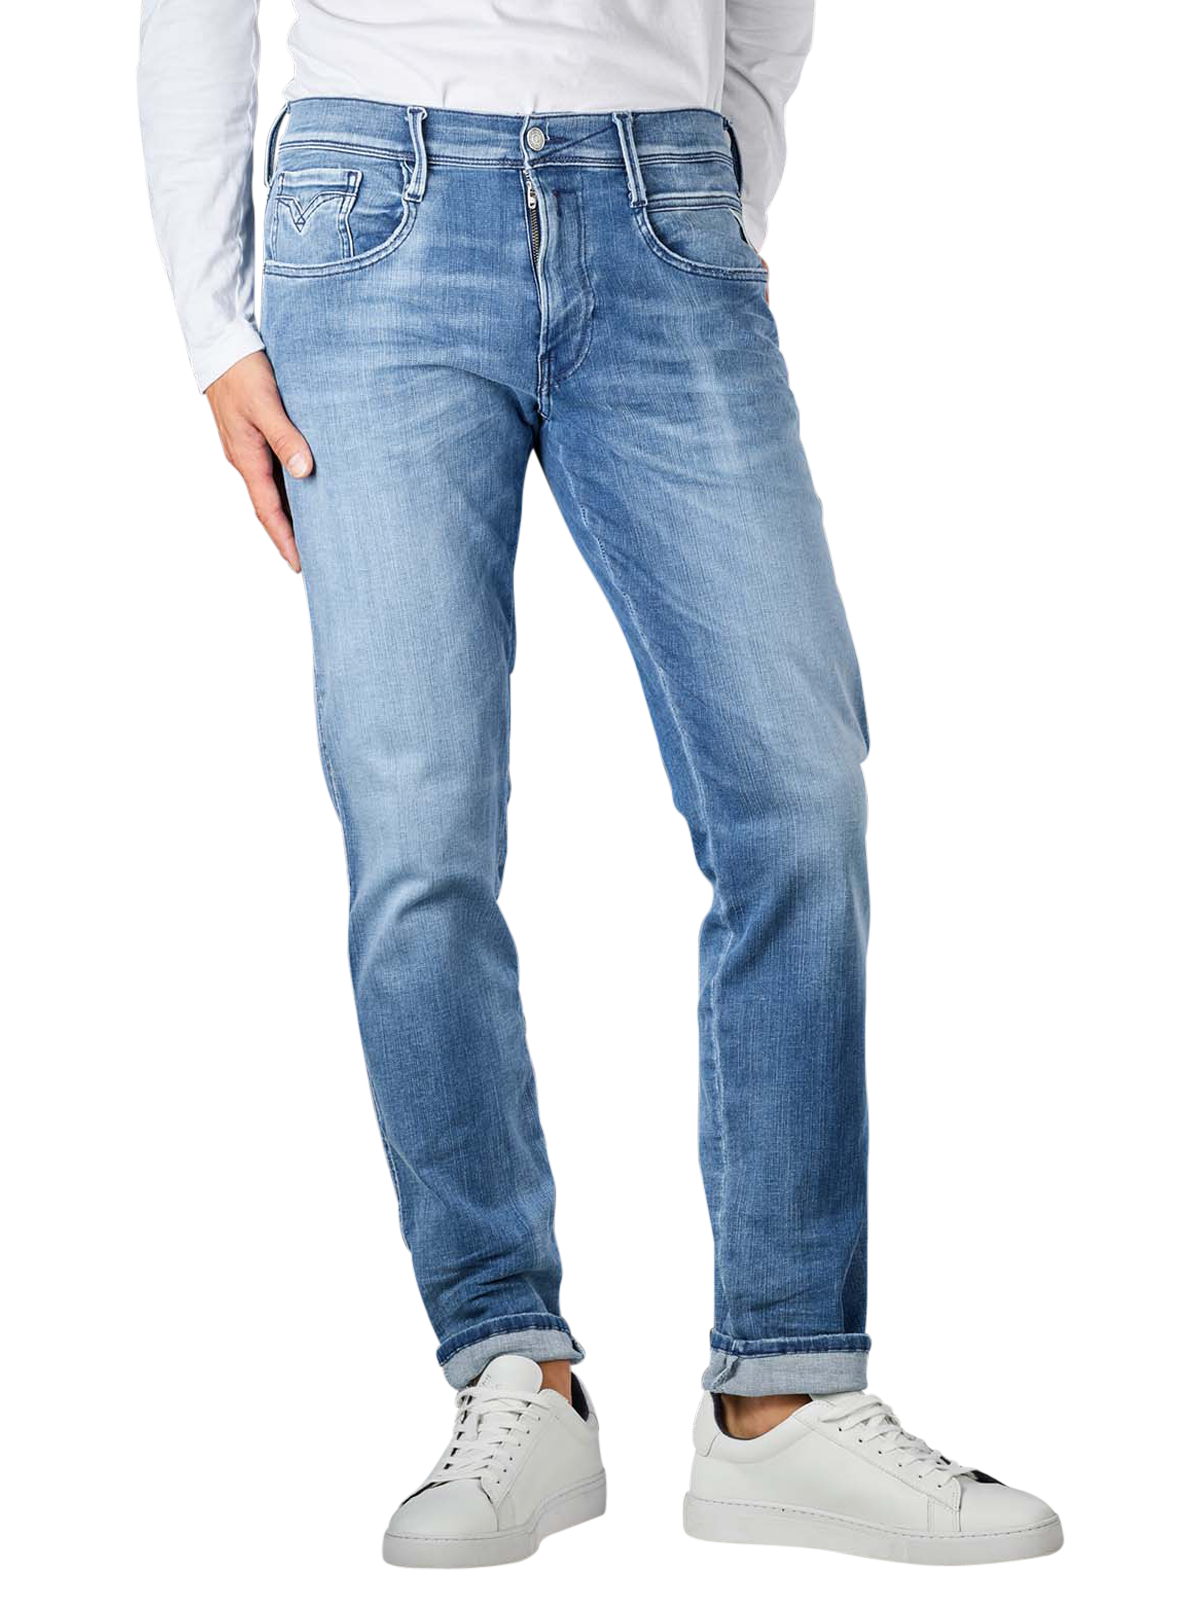 1158-replay-men-jeans-blue-denim-straight-fit-m914y-661-wi6-010-f.png